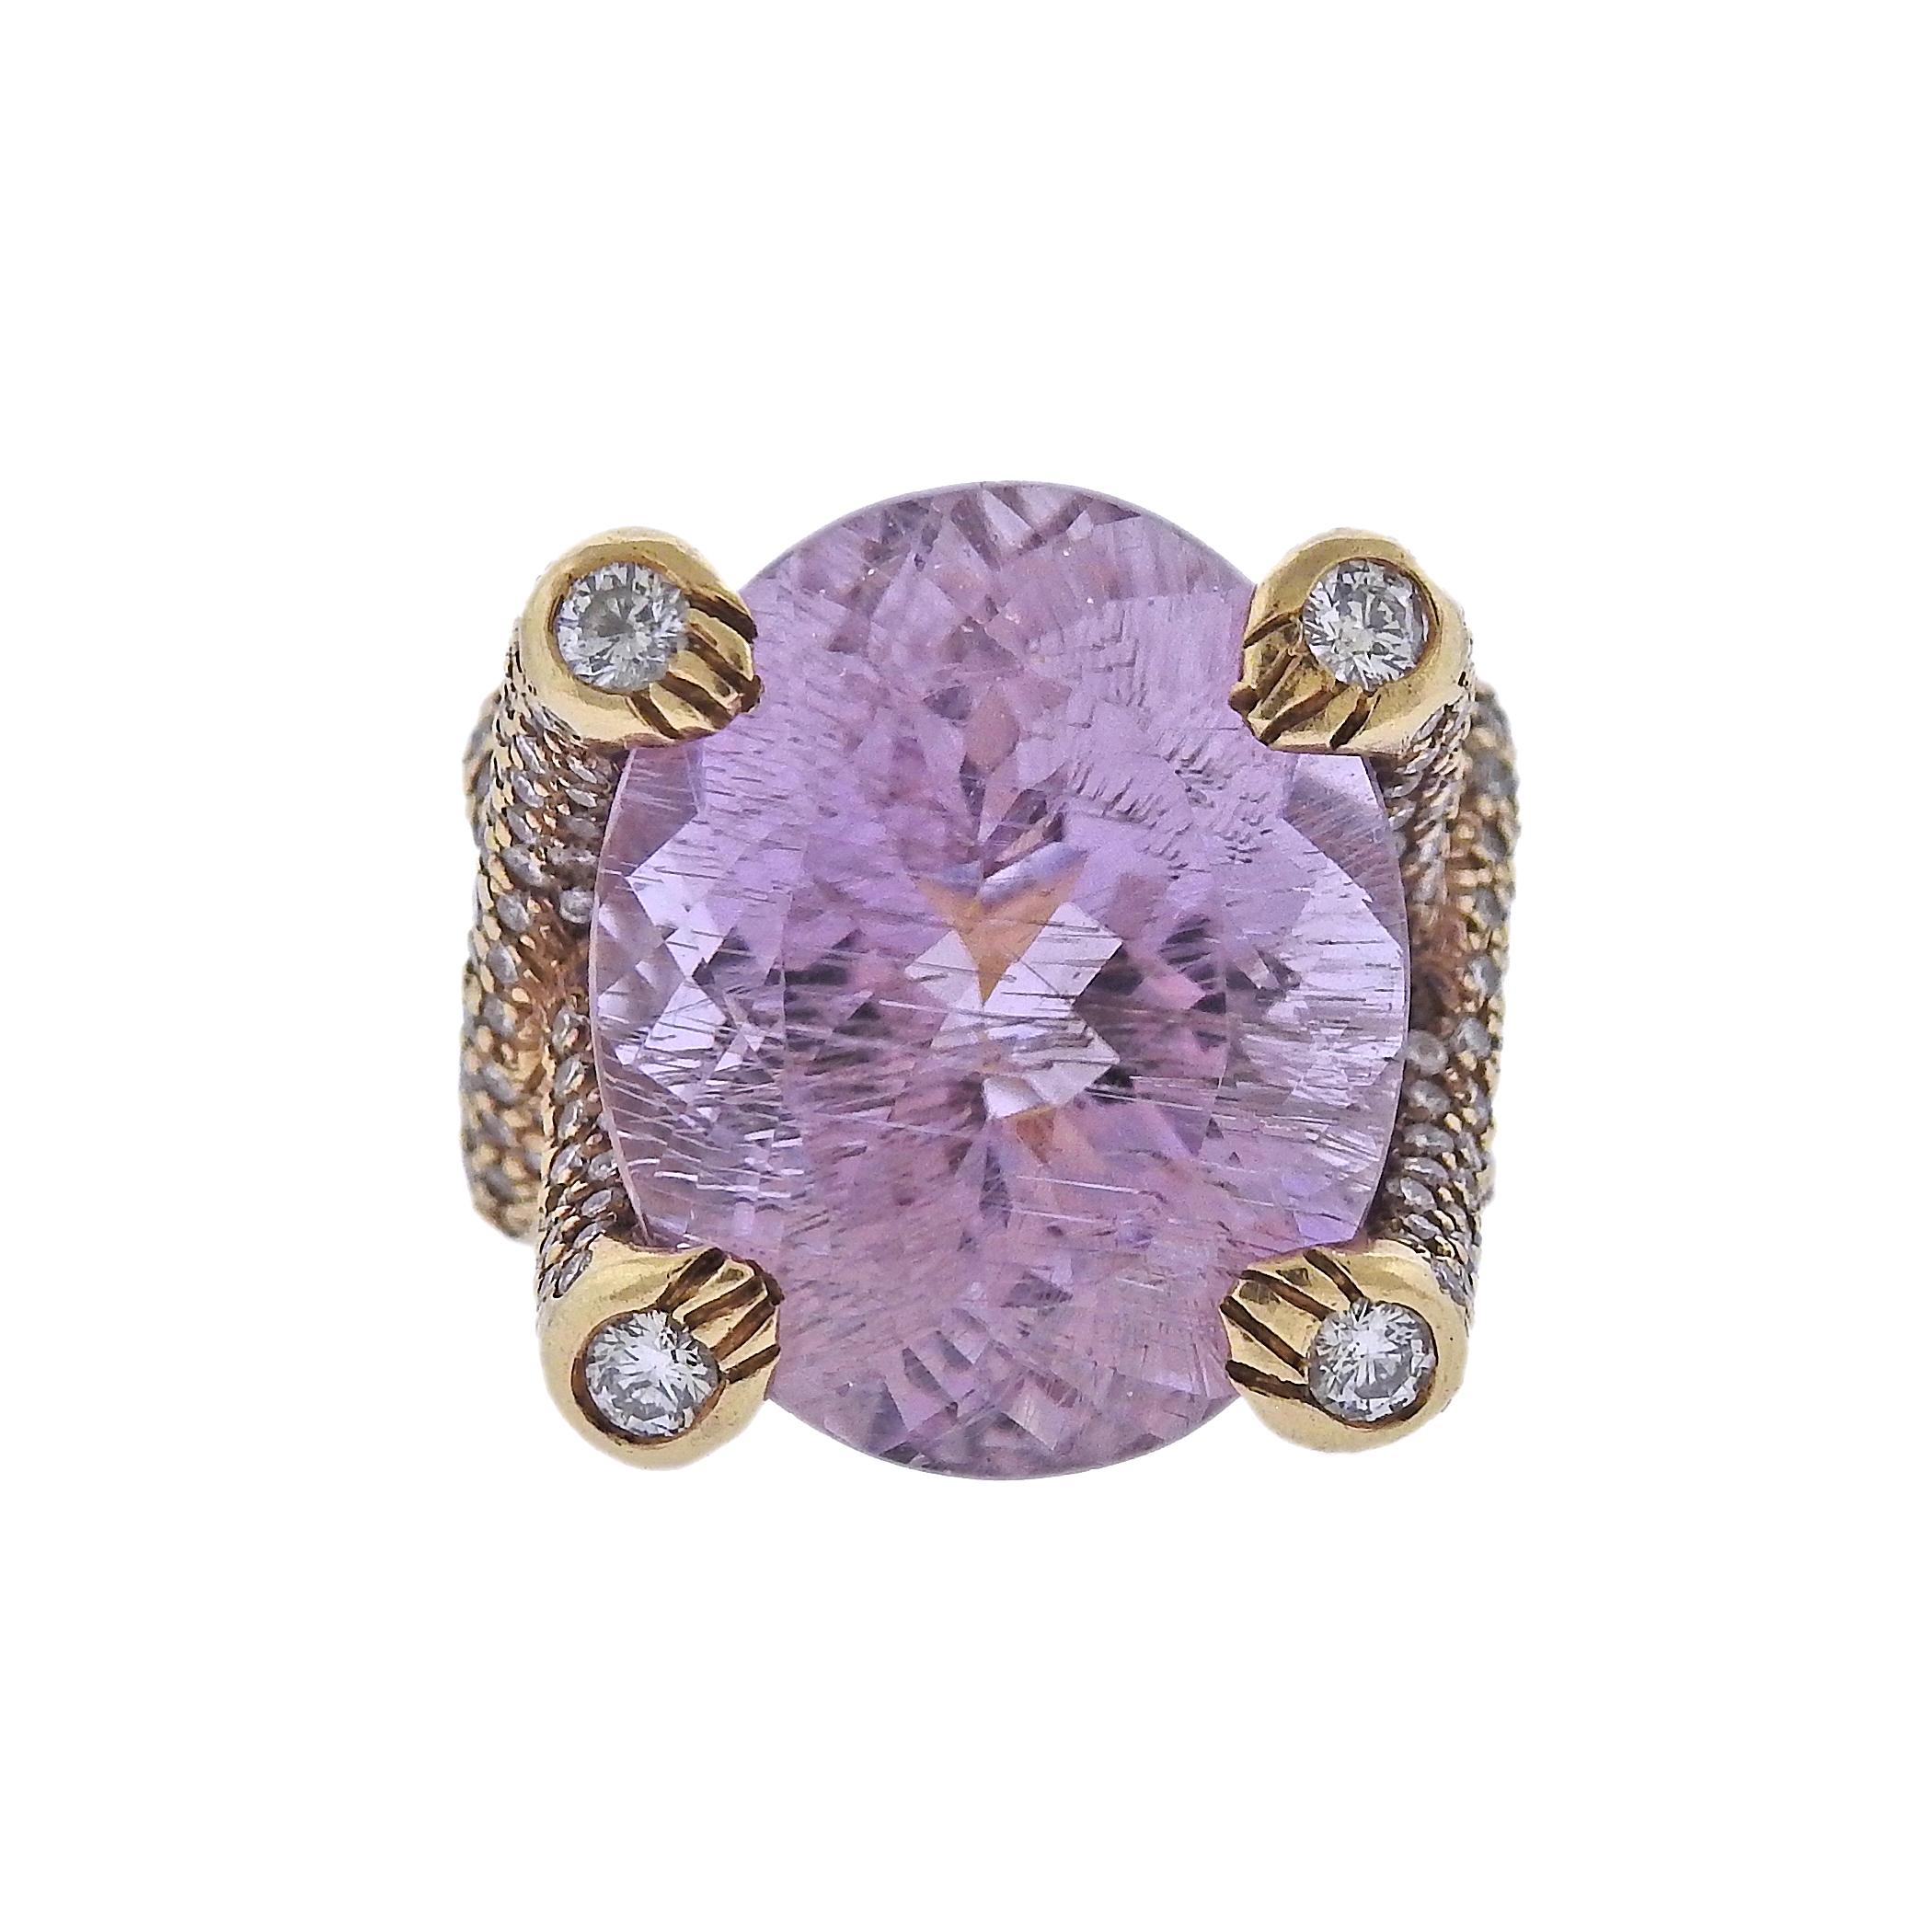 Metal: 18k Yellow Gold
Gemstones: Rutilated Rose Quartz - approx. 20ct, Diamonds - approx. 2.20ctw VS / G-H
Ring Size 6.75, Top Of Ring 20mm x 19.5mm, Sits 11.7mm From Finger
Weight: 25.8 grams